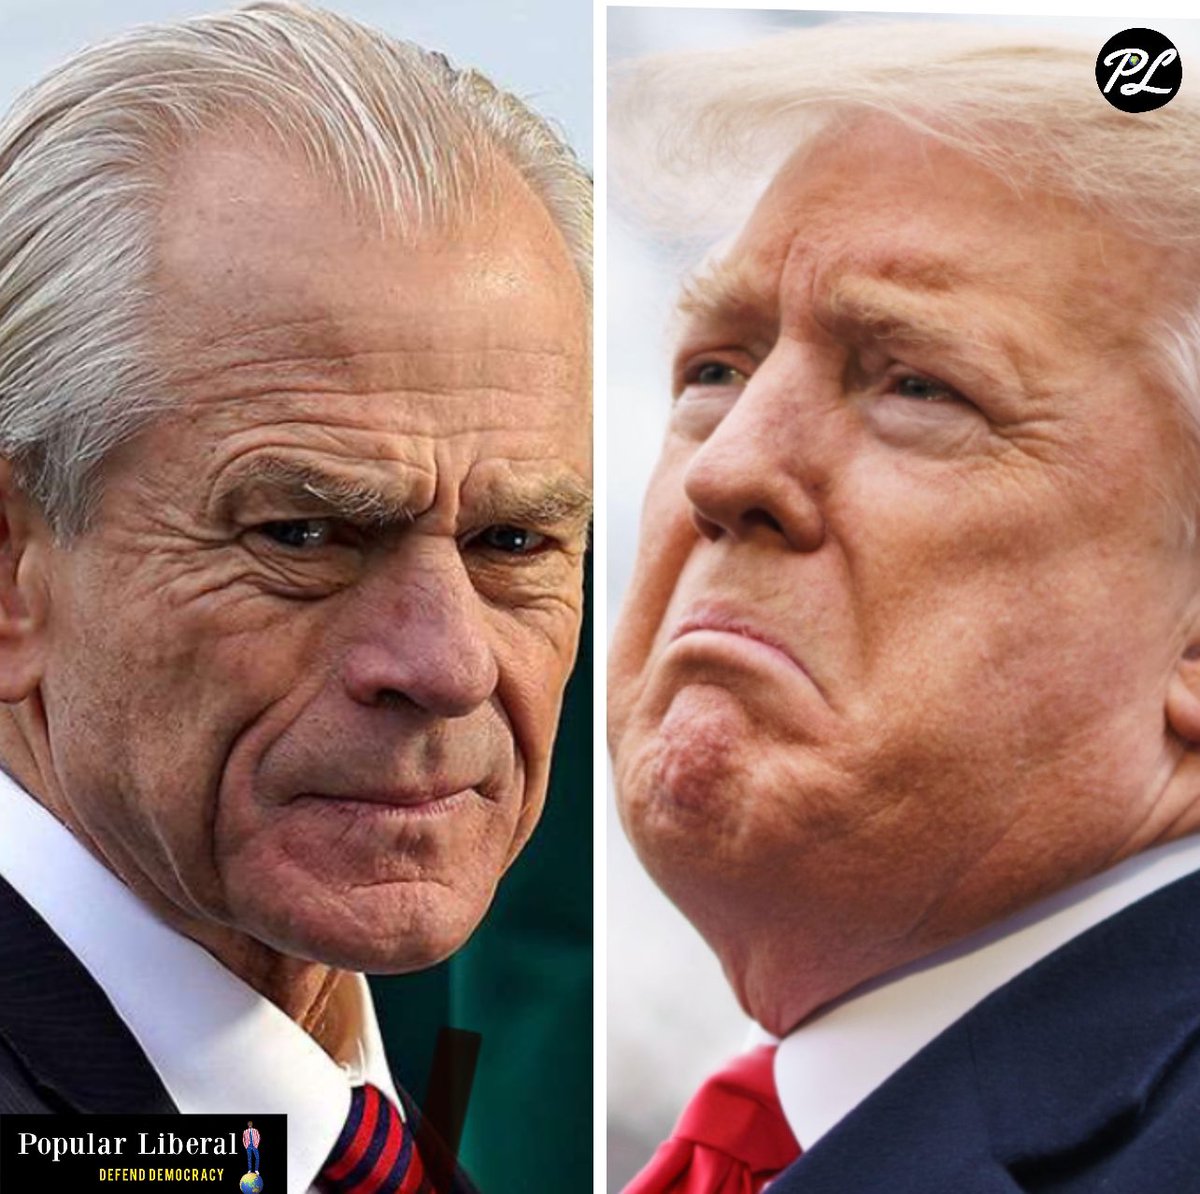 BREAKING NEW: Navarro has been ordered to serve his four-month sentence in prison for disregarding a subpoena related to the events of January 6th, as determined by a unanimous panel of the U.S. Court of Appeals for the D.C. Circuit. A senior aide to Donald Trump, a 74-year-old